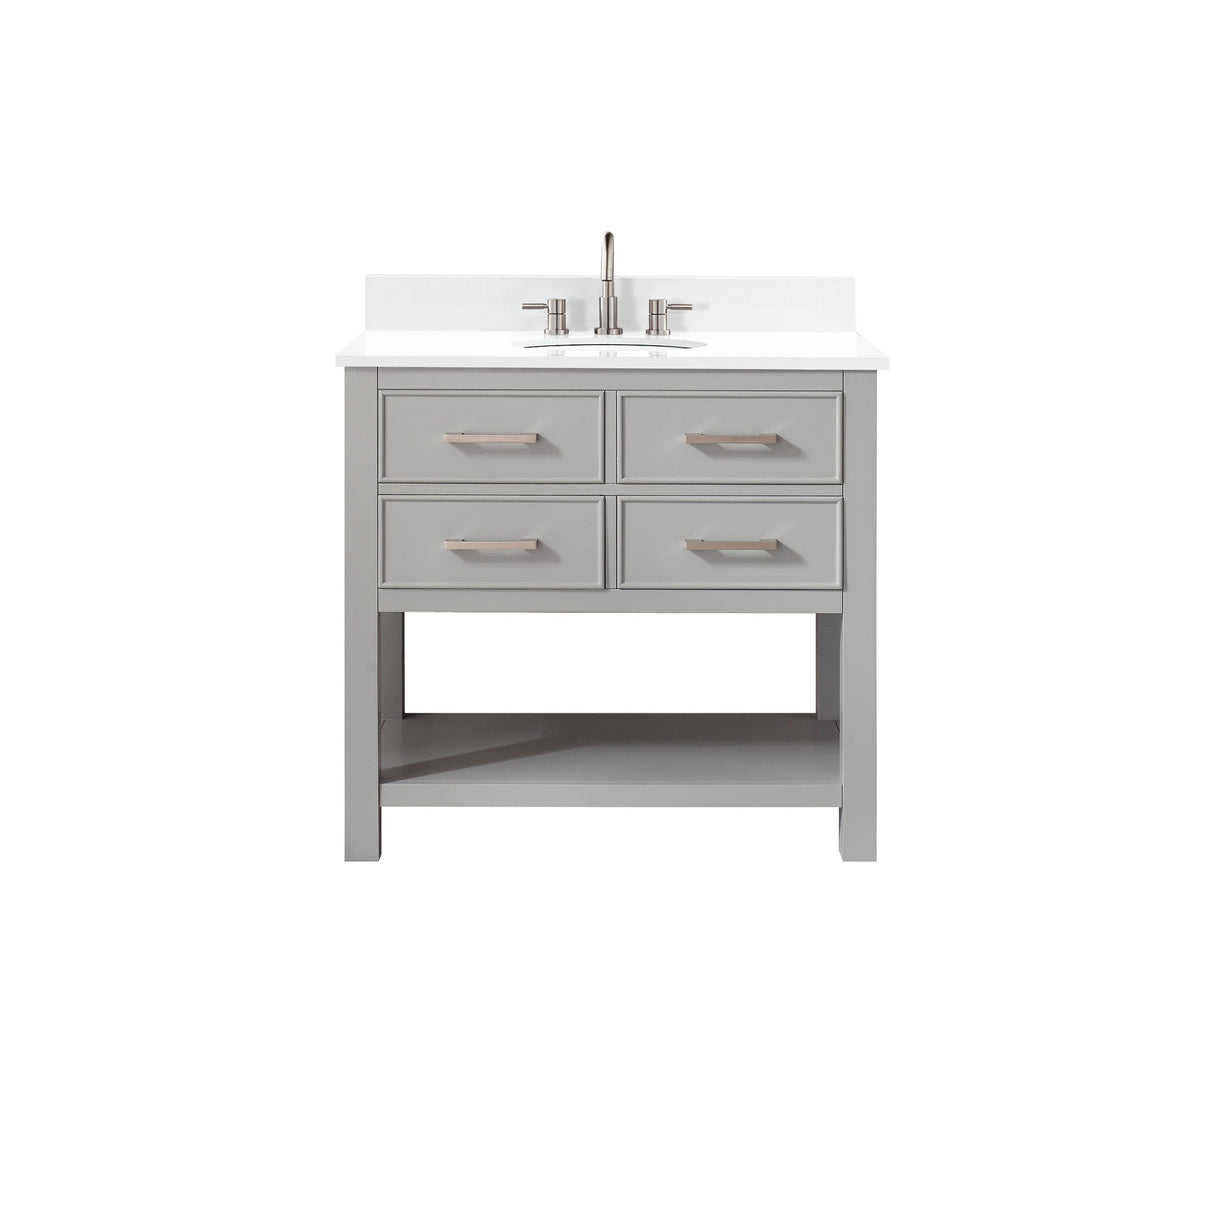 Avanity Brooks 37 in. Vanity in Chilled Gray finish with Engineered White Stone Top